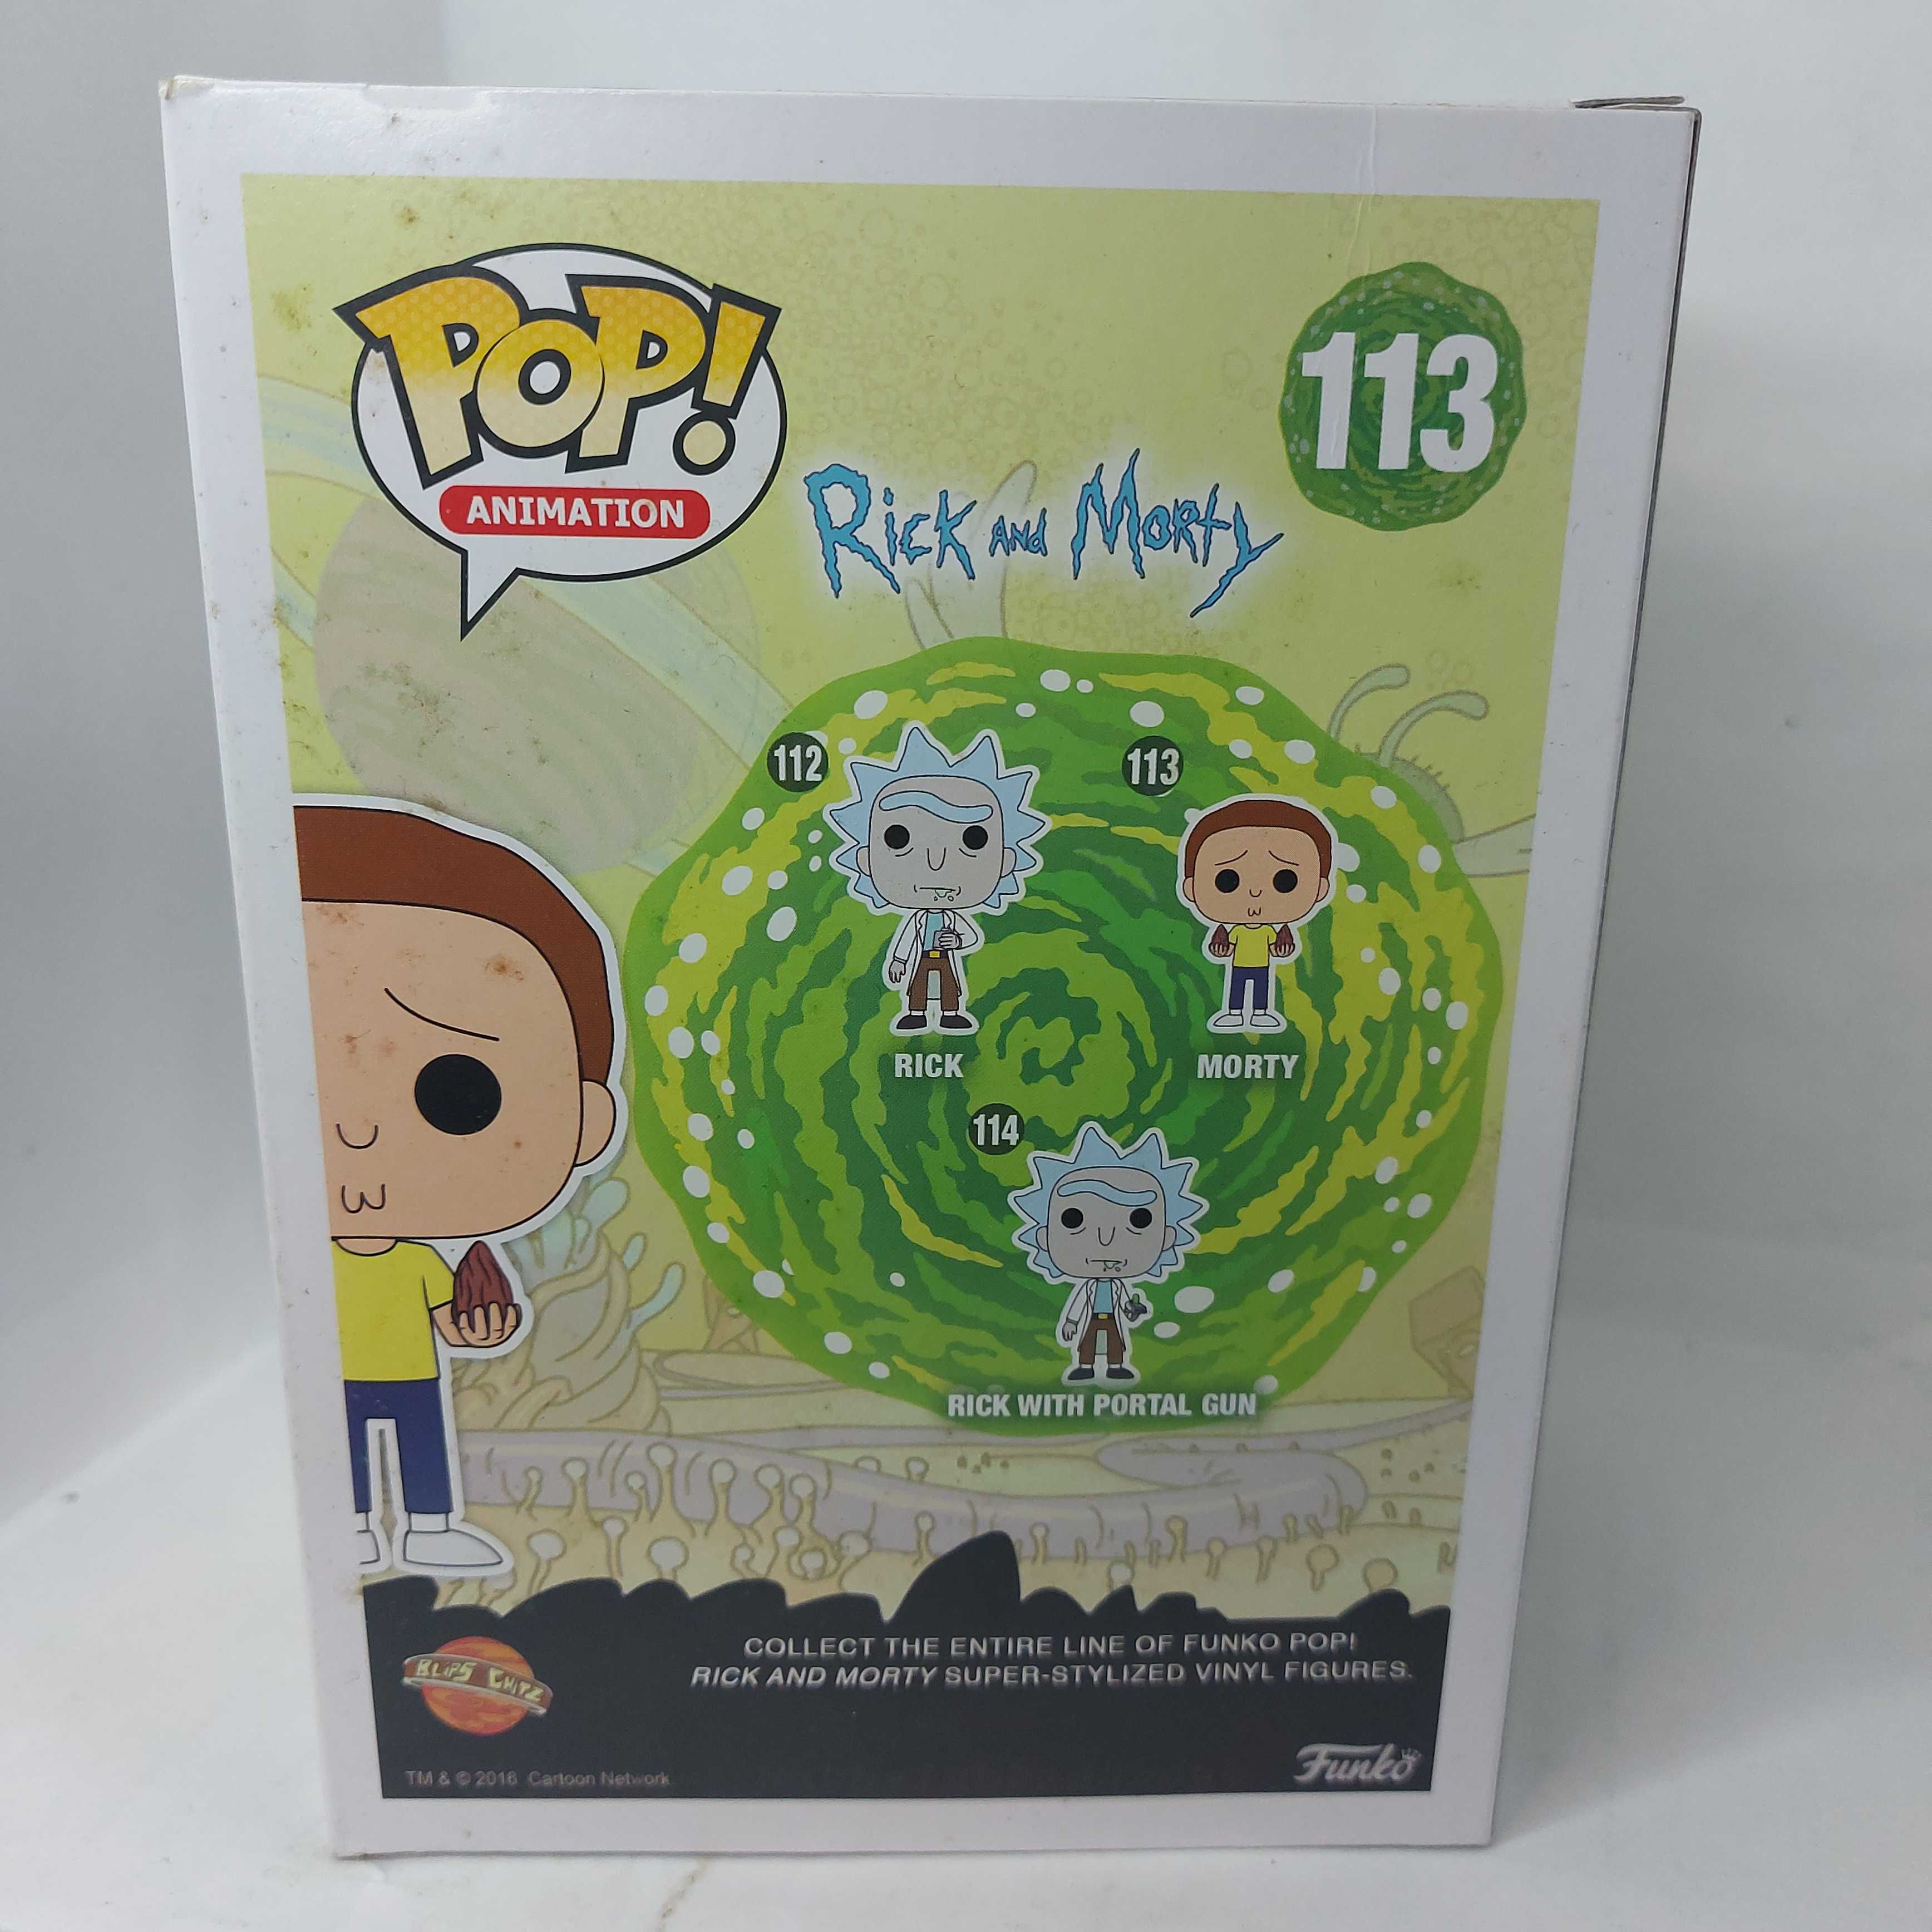 Funko Pop / Morty / 113 / Rick and Morty